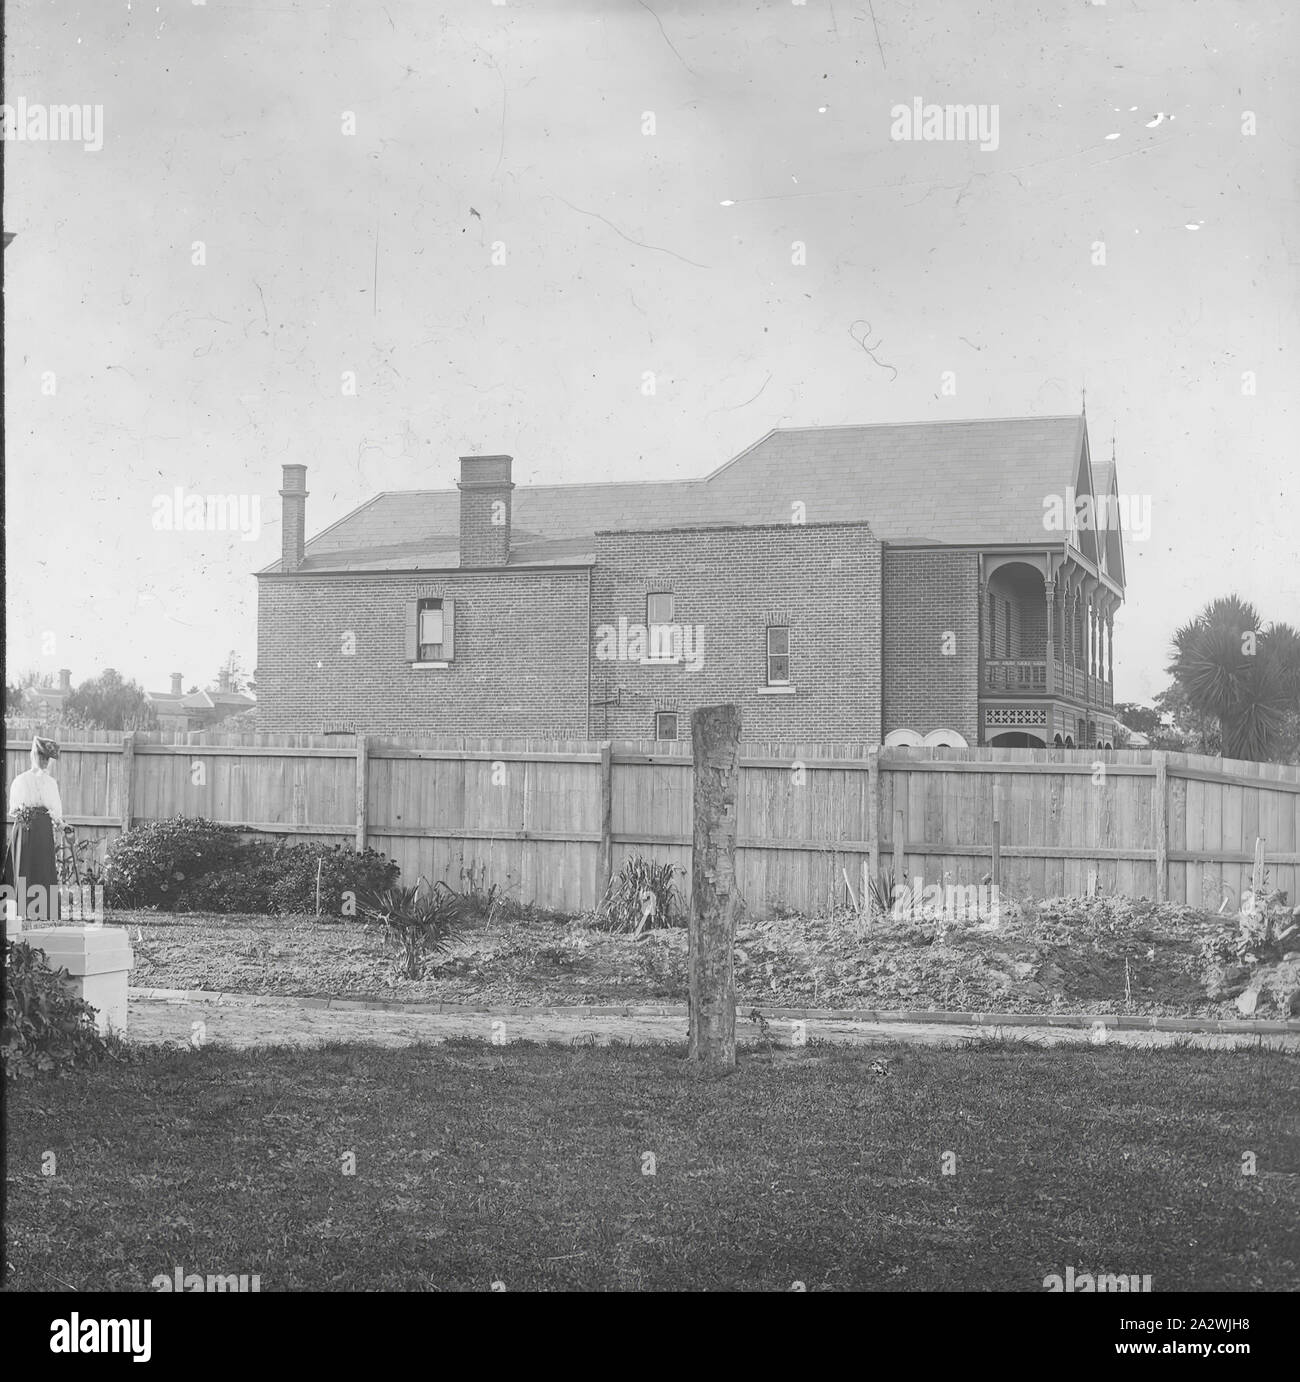 Lantern Slide - Suburban Home, Australia, Date Unknown, Black and white image looking across a newly established suburban garden to the neighbour's two storey home over the fence, photographed by A.J. Campbell Stock Photo